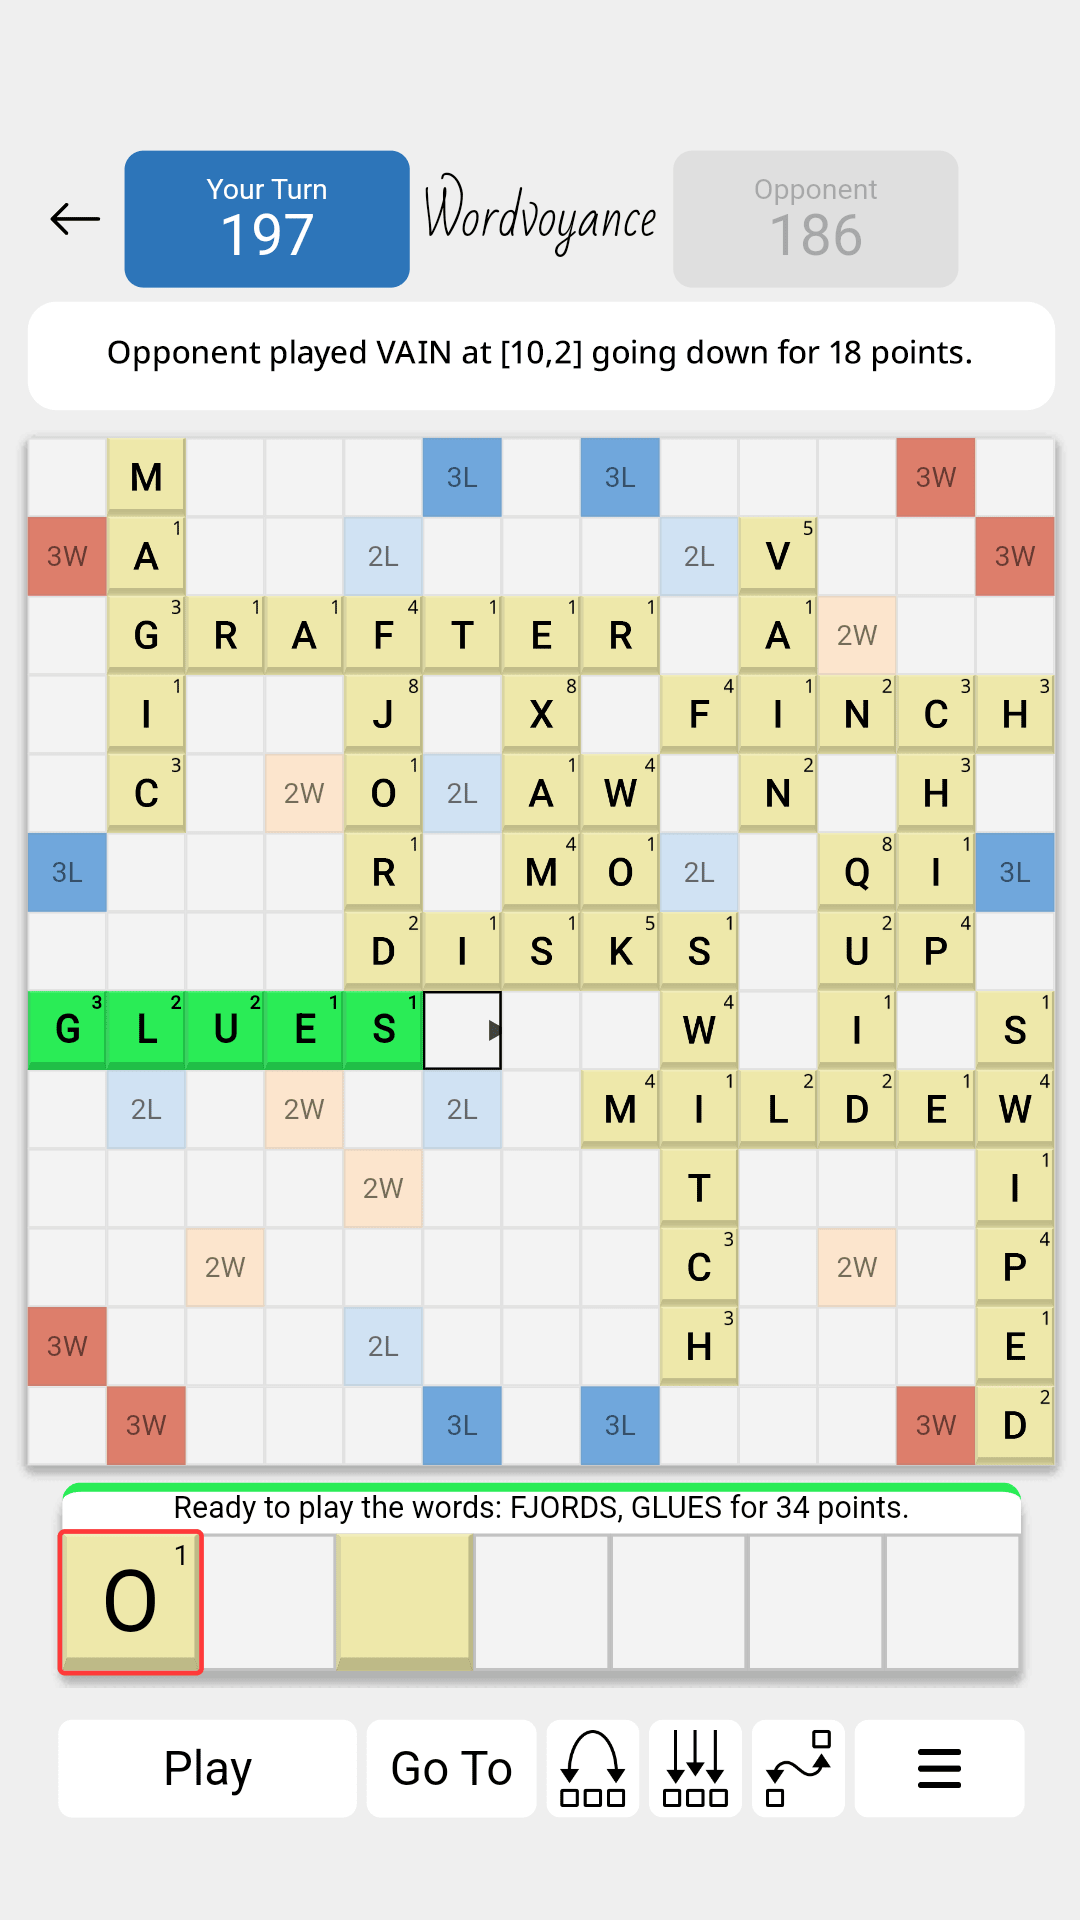 A screenshot of Wordvoyance, in its Light theme, where the player has used rack tiles to spell the word GLUES for 34 points, forming a crossword by making the word FJORD on the board into a plural.